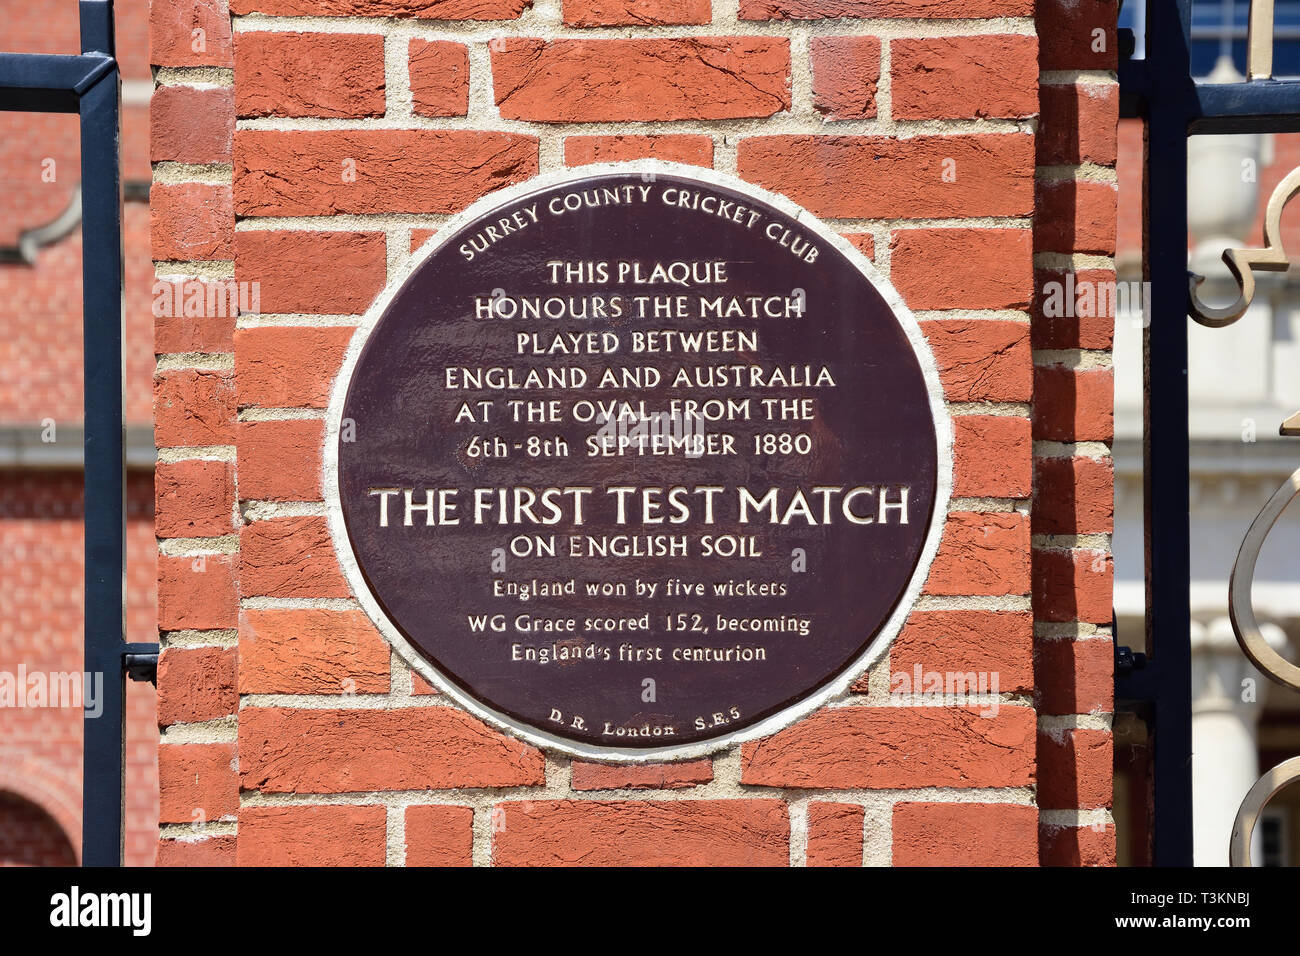 Plaque honouring 1st test match played in England, Oval Cricket Ground, Kennington, London Borough of Lambeth, Greater London, England, United Kingdom Stock Photo